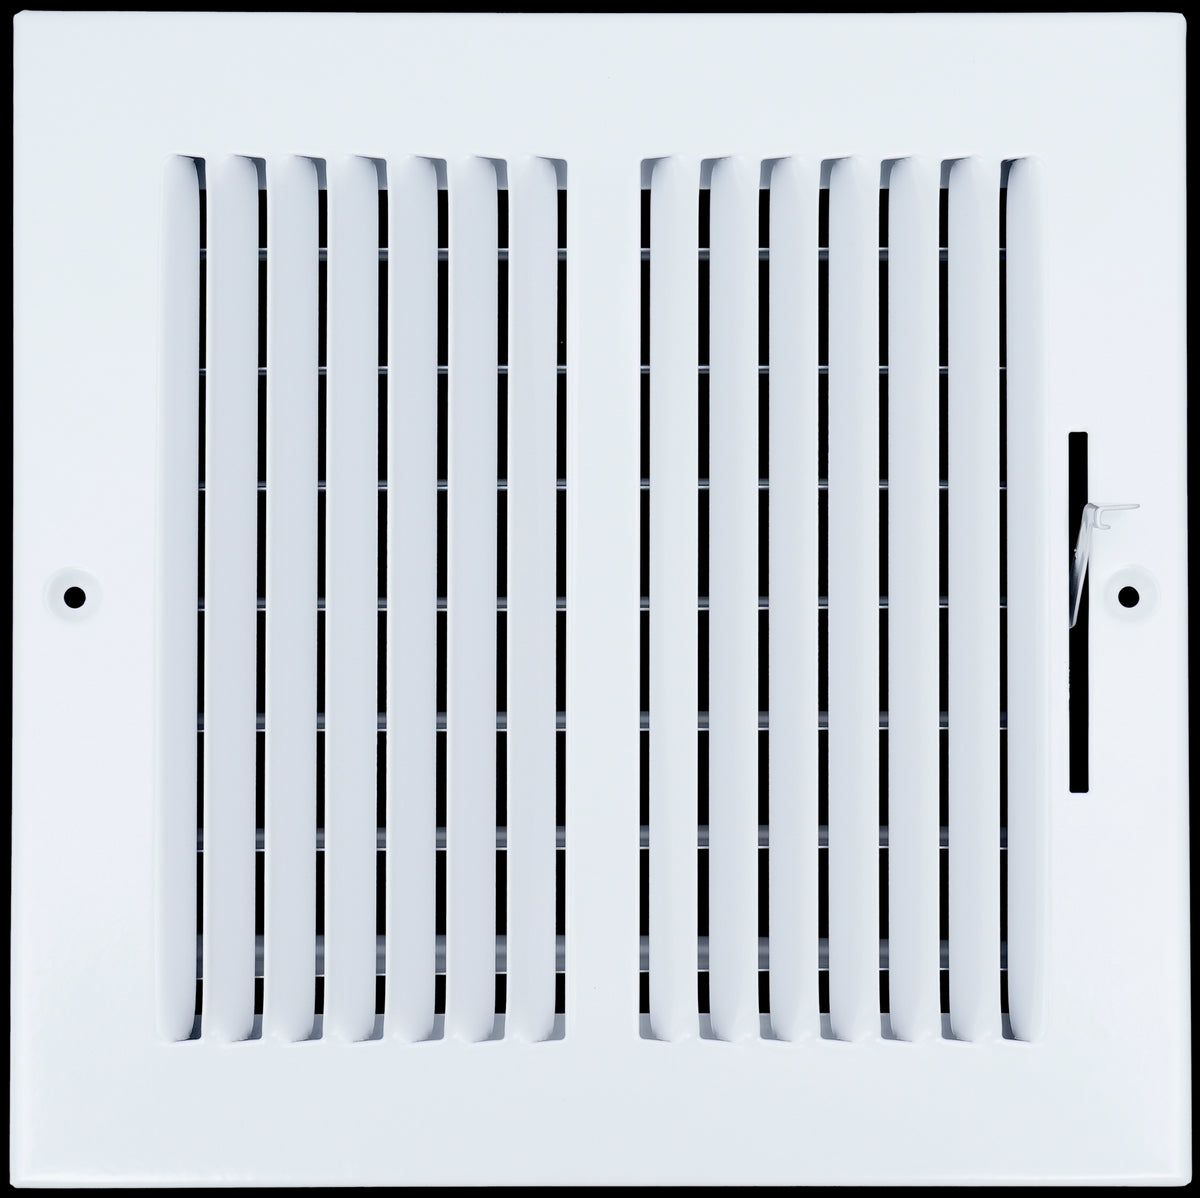 airgrilles 8 x 8 duct opening 2 way steel air supply diffuser for sidewall and ceiling hnd-asg-wh-2way-8x8 764613097535 1